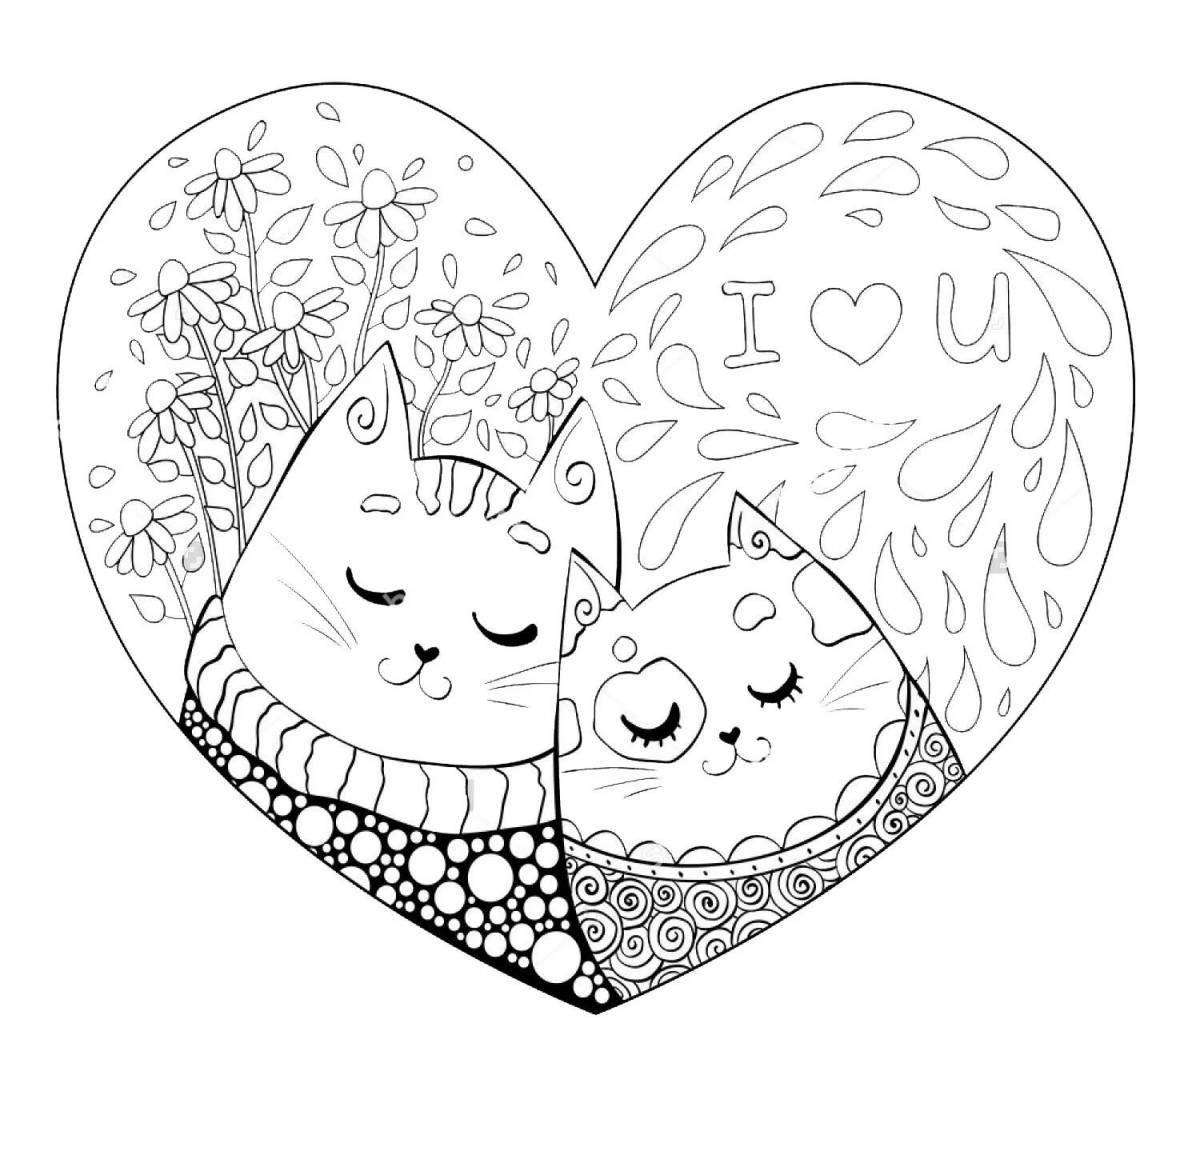 Amazing coloring pages for girls 12 years old - cats